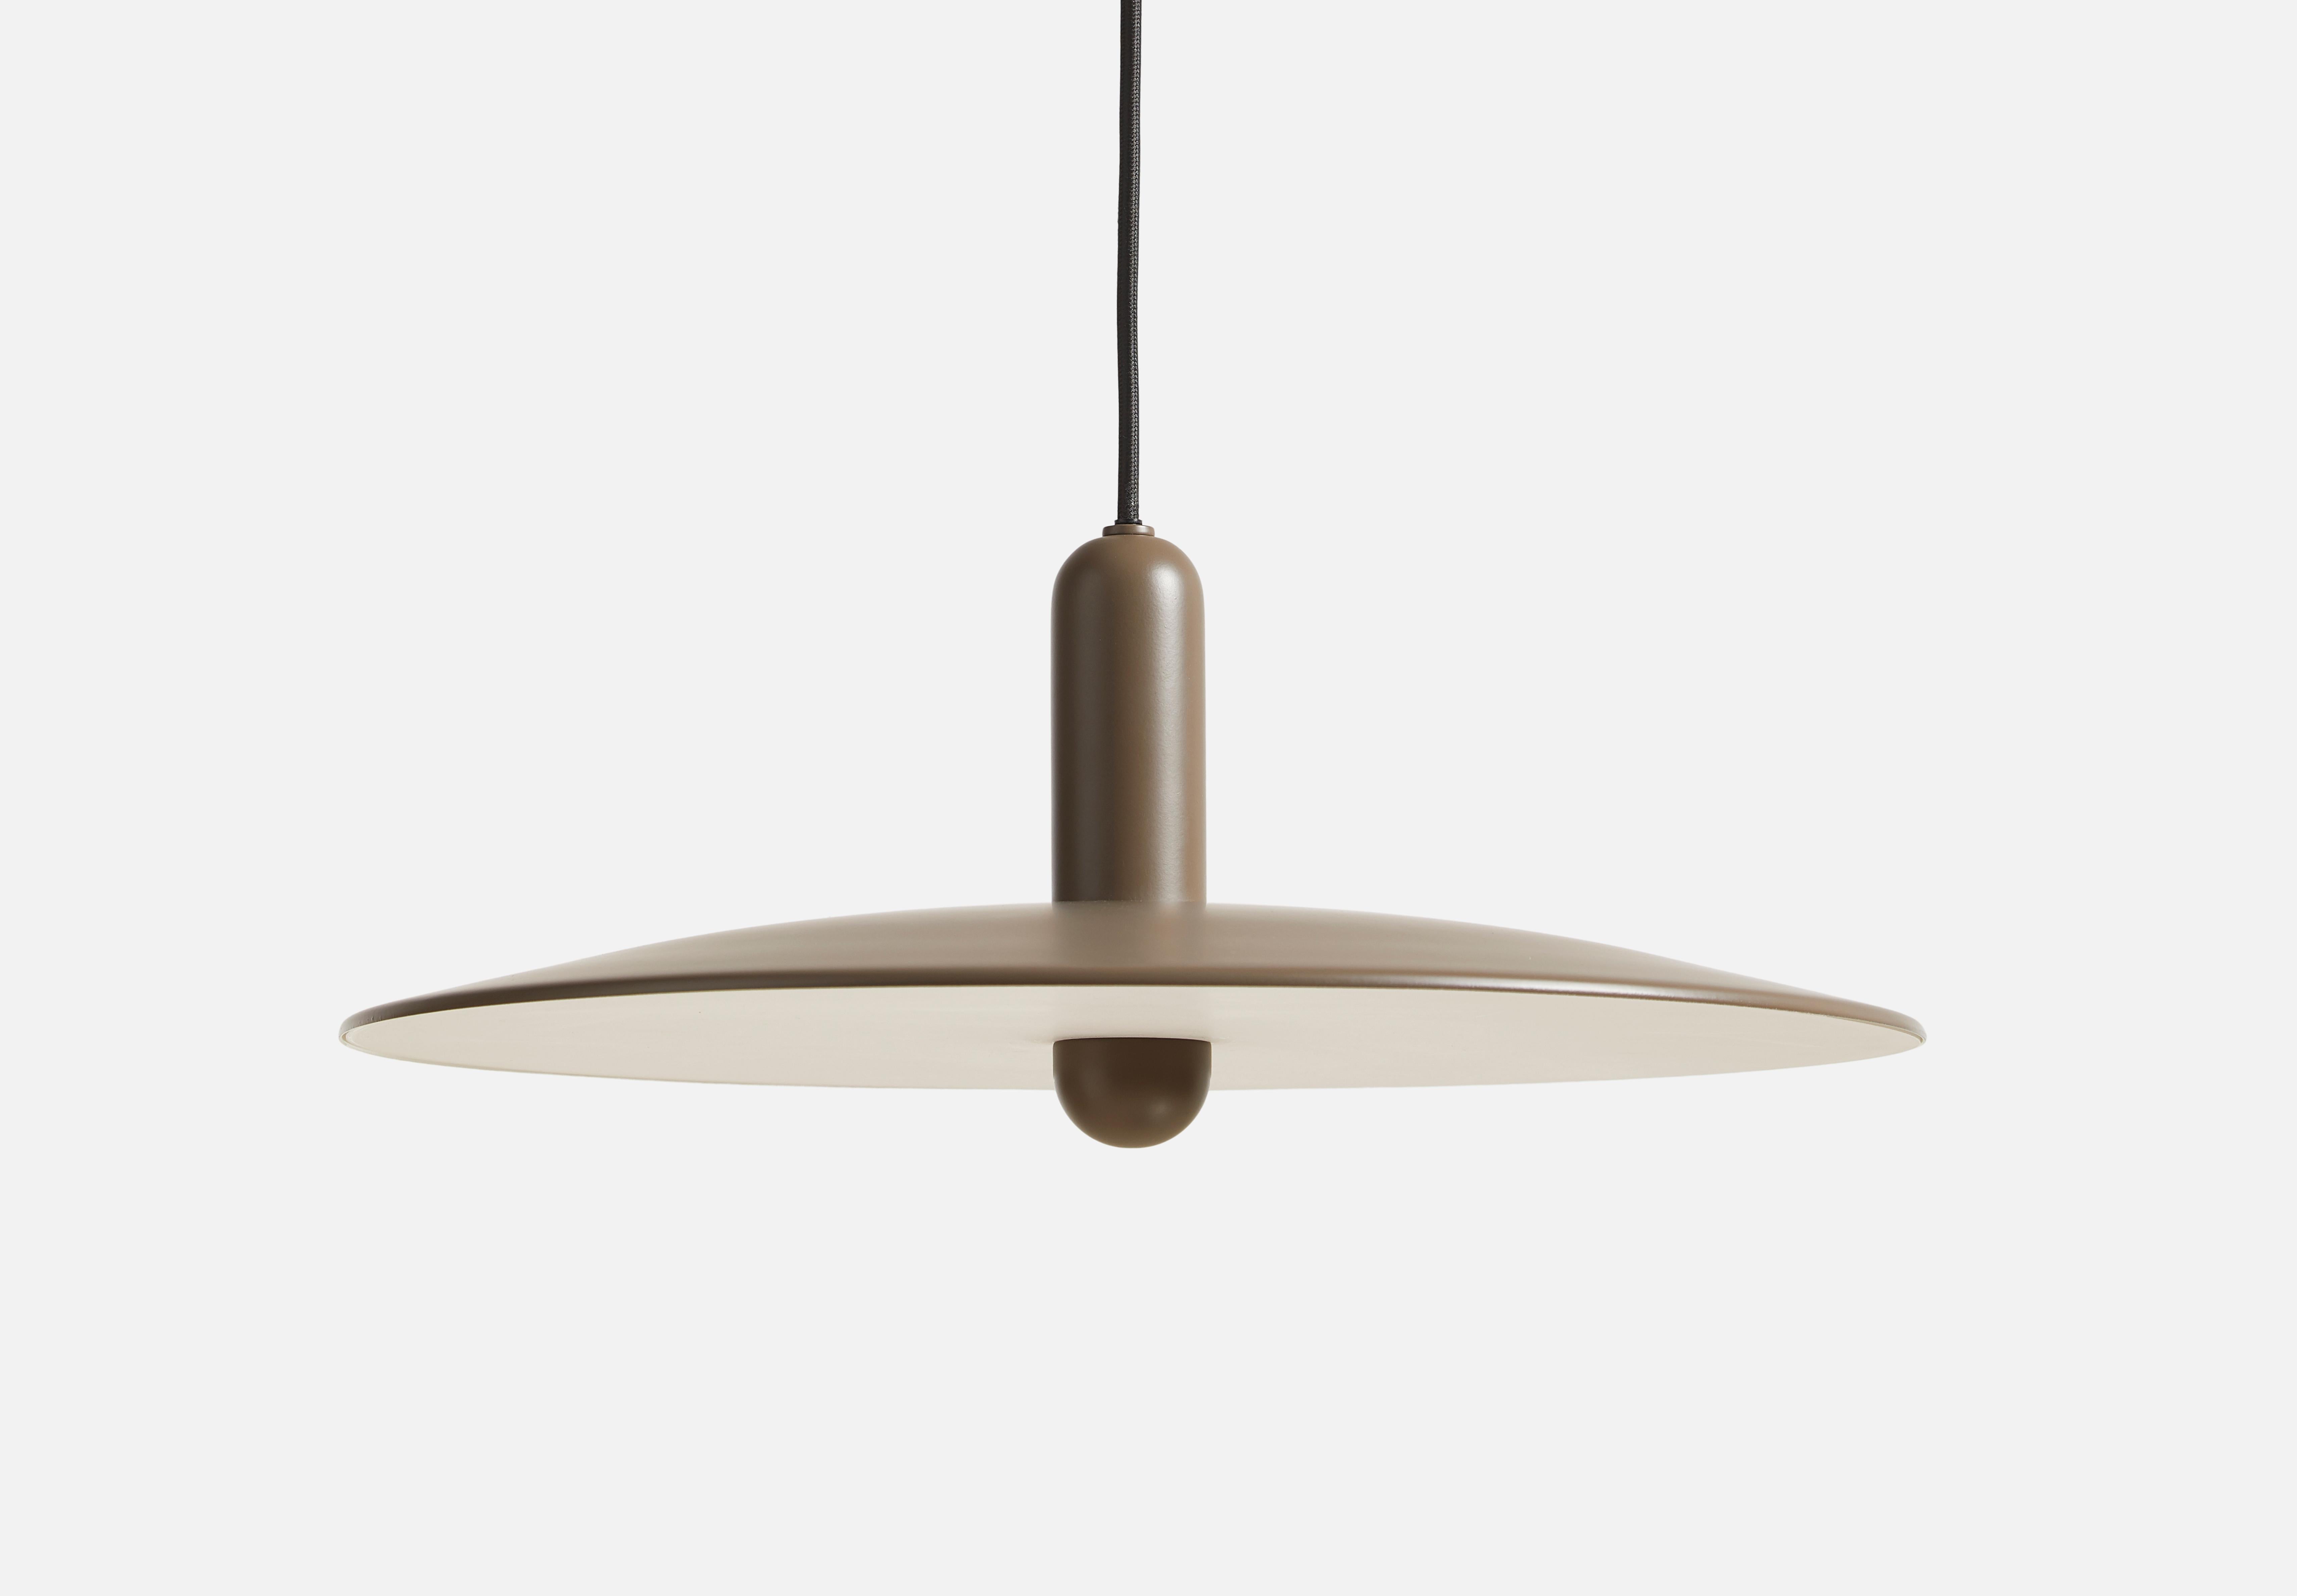 Large Taupe Lu pendant lamp by Beaverhausen
Materials: metal.
Dimensions: D 45 x H 22 cm
Available in black or taupe and in 2 sizes: D 33, D 45 cm.

Beaverhausen is a Brussels-based design studio founded by Mimy A. Diar and Ad Luijten. Both